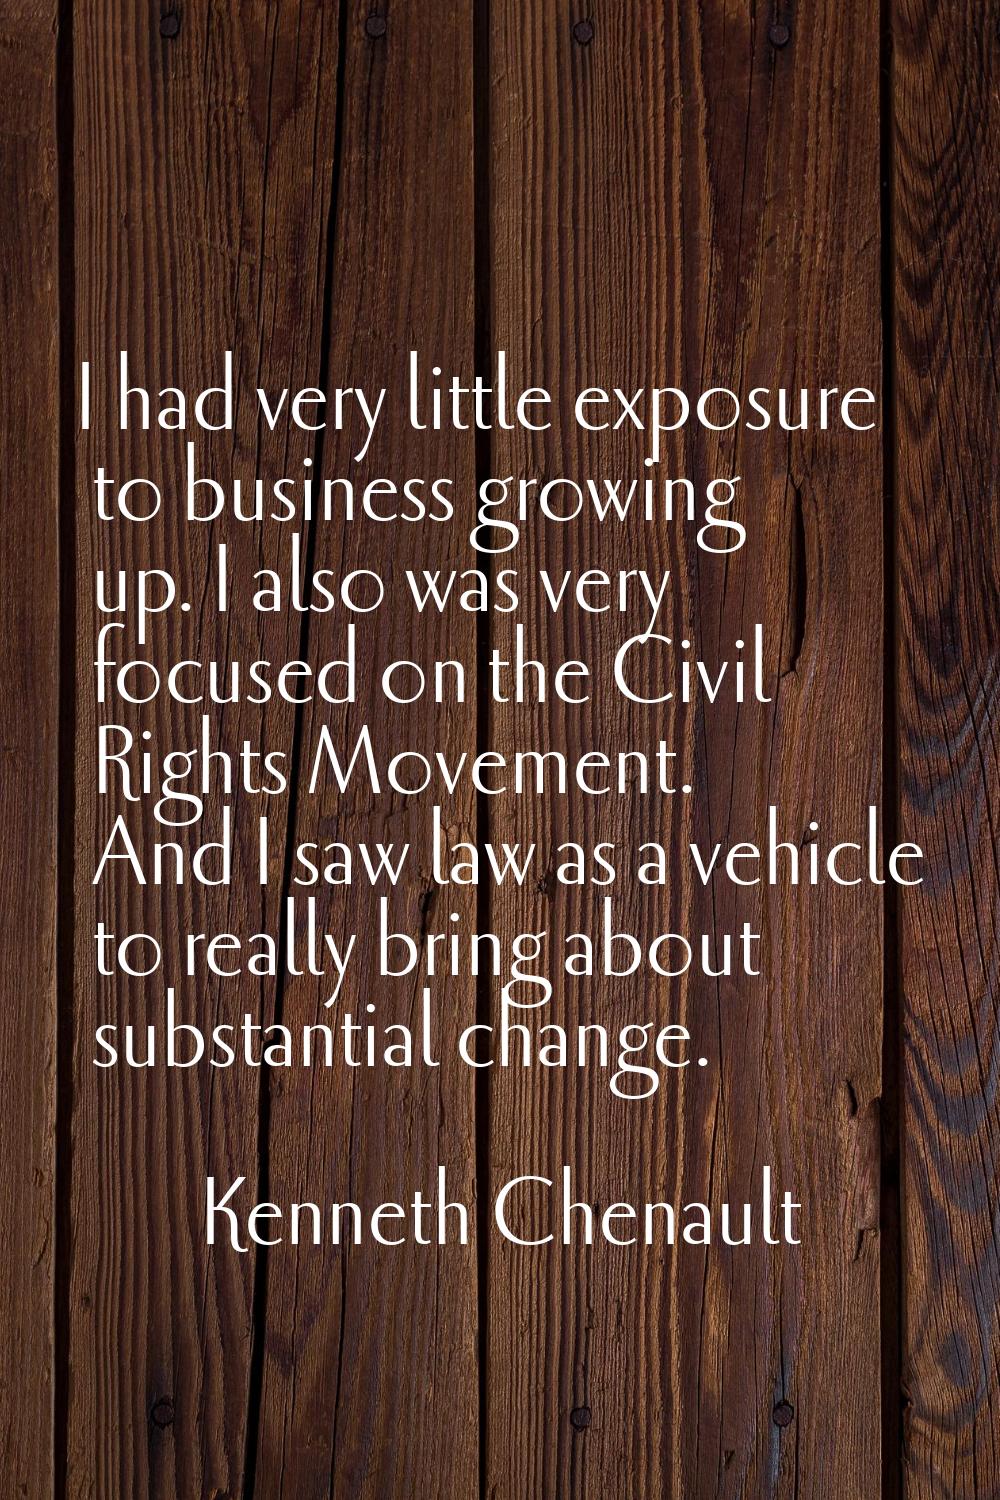 I had very little exposure to business growing up. I also was very focused on the Civil Rights Move